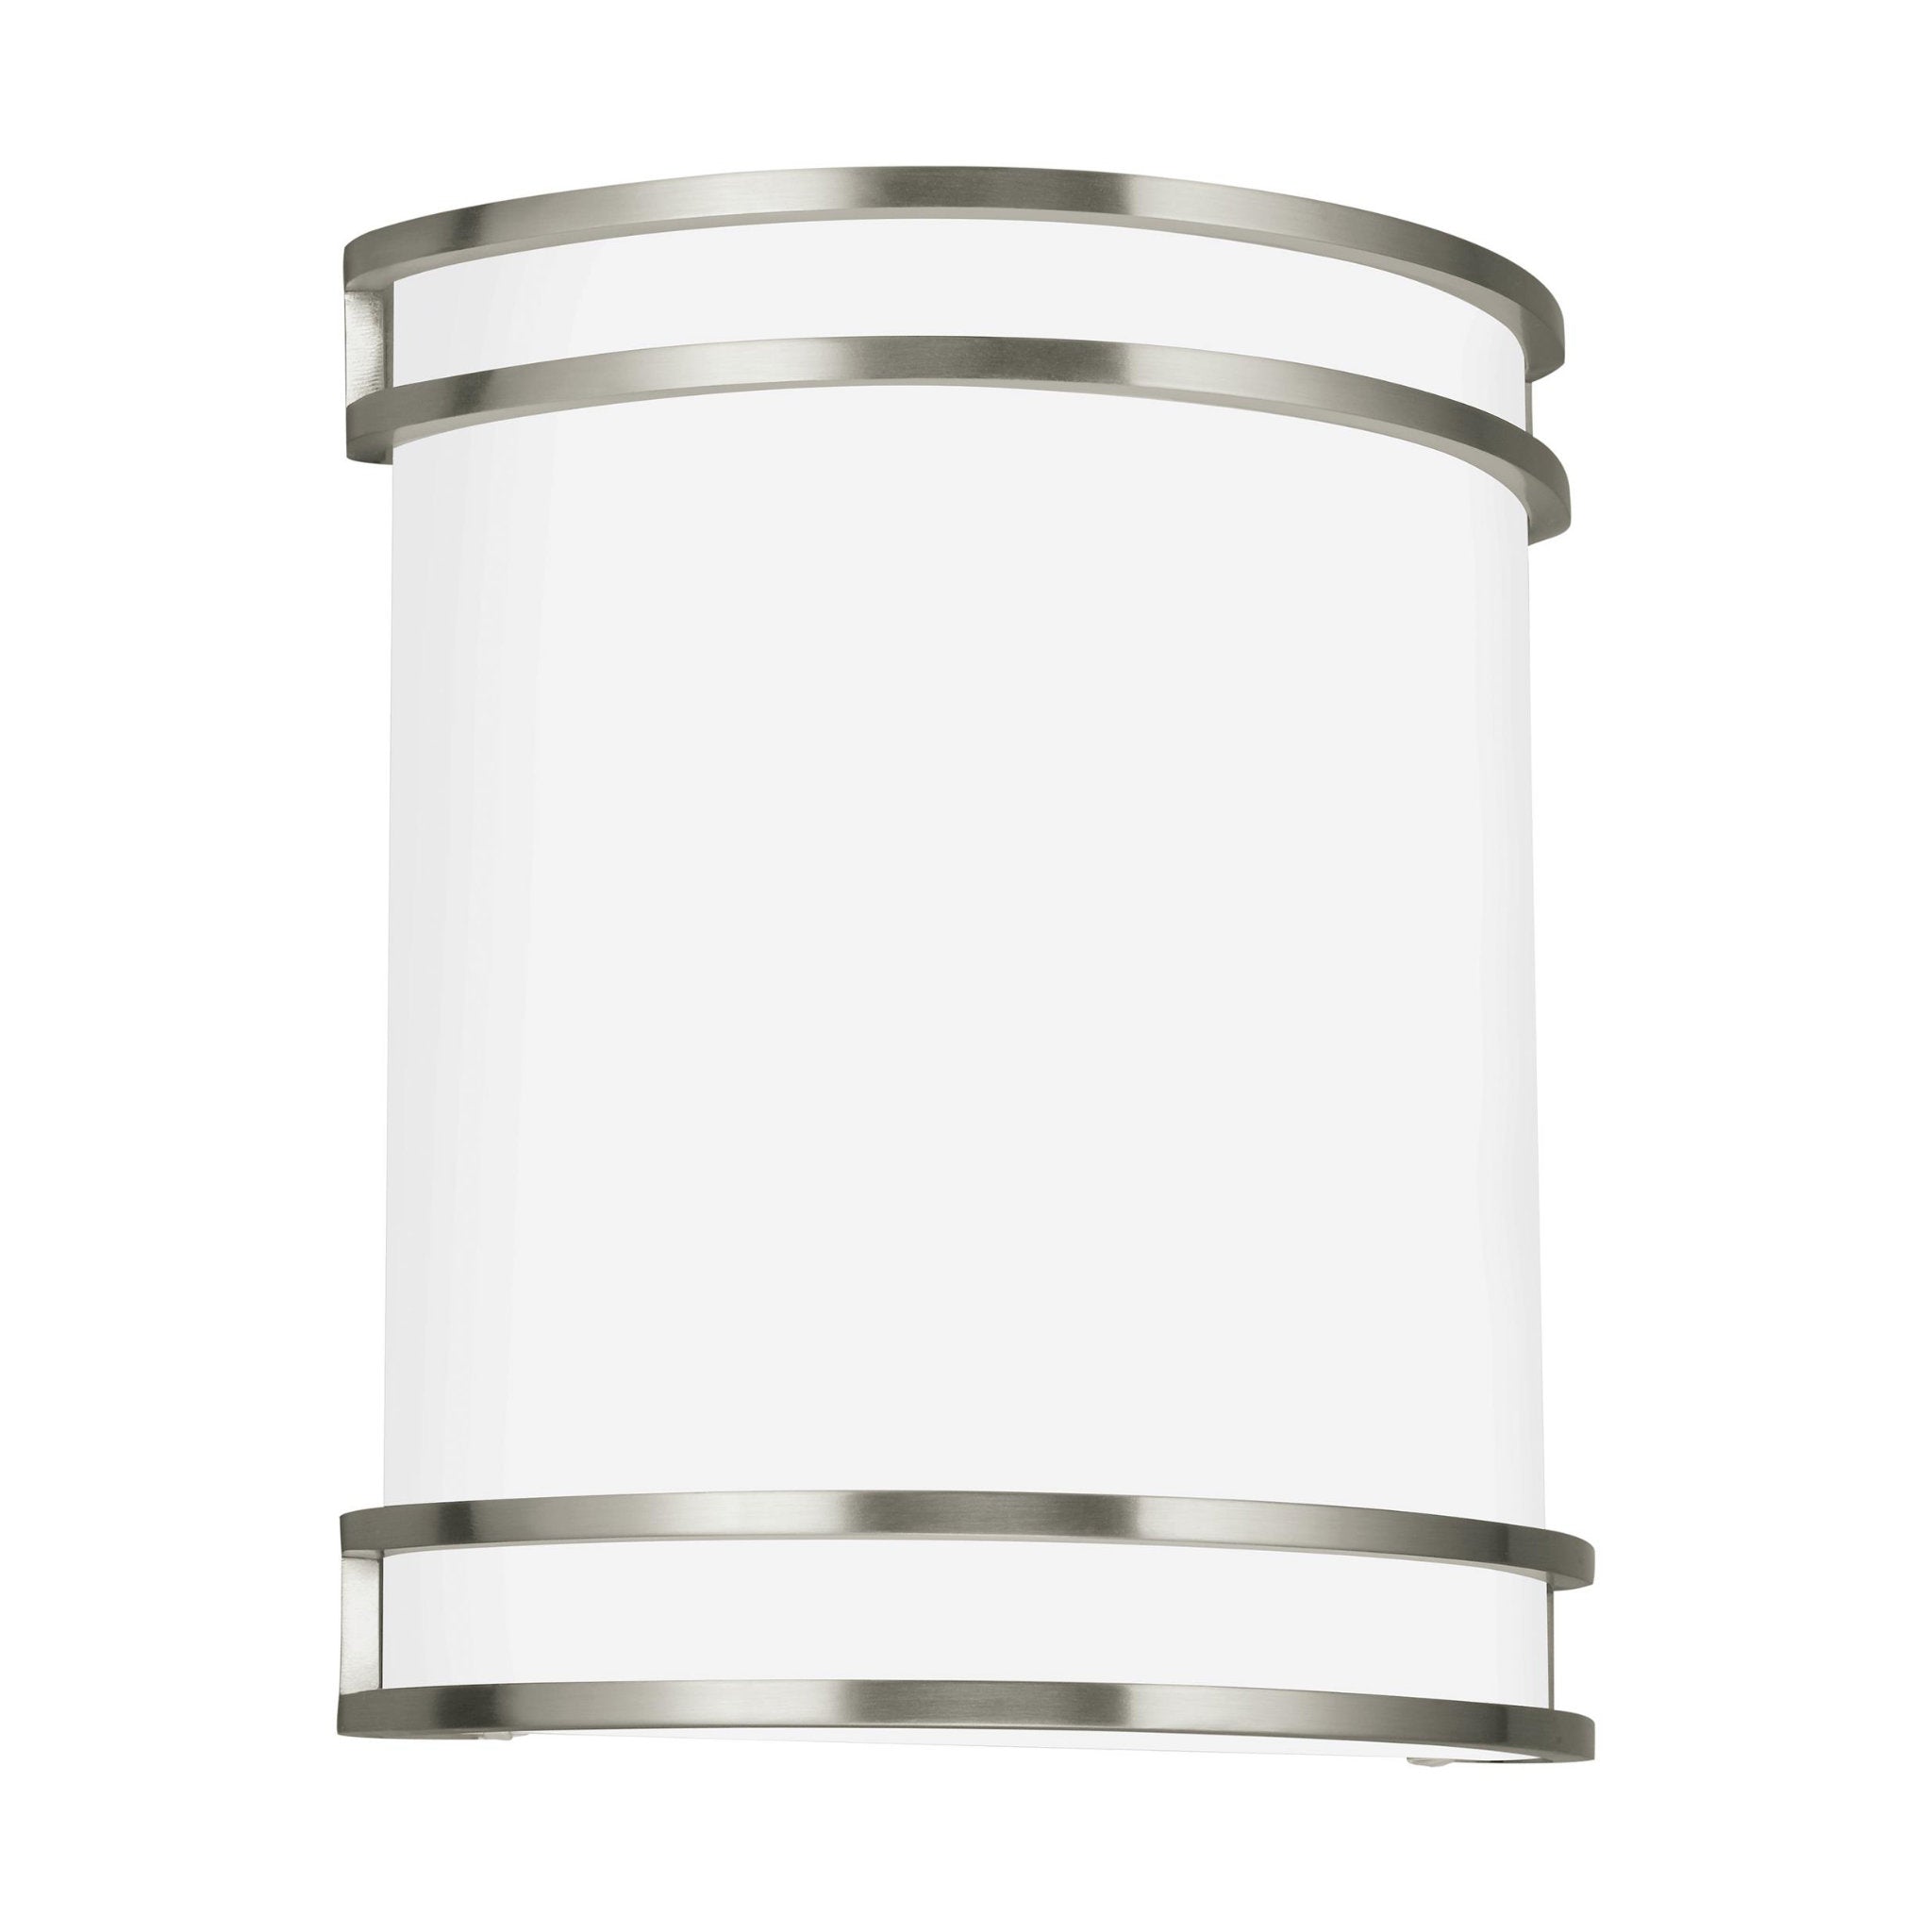 Ravel LED Wall Sconce Modern Bath Fixture 9.5" Width 10.5" Height Steel Rectangular Satin White Shade in Brushed Nickel